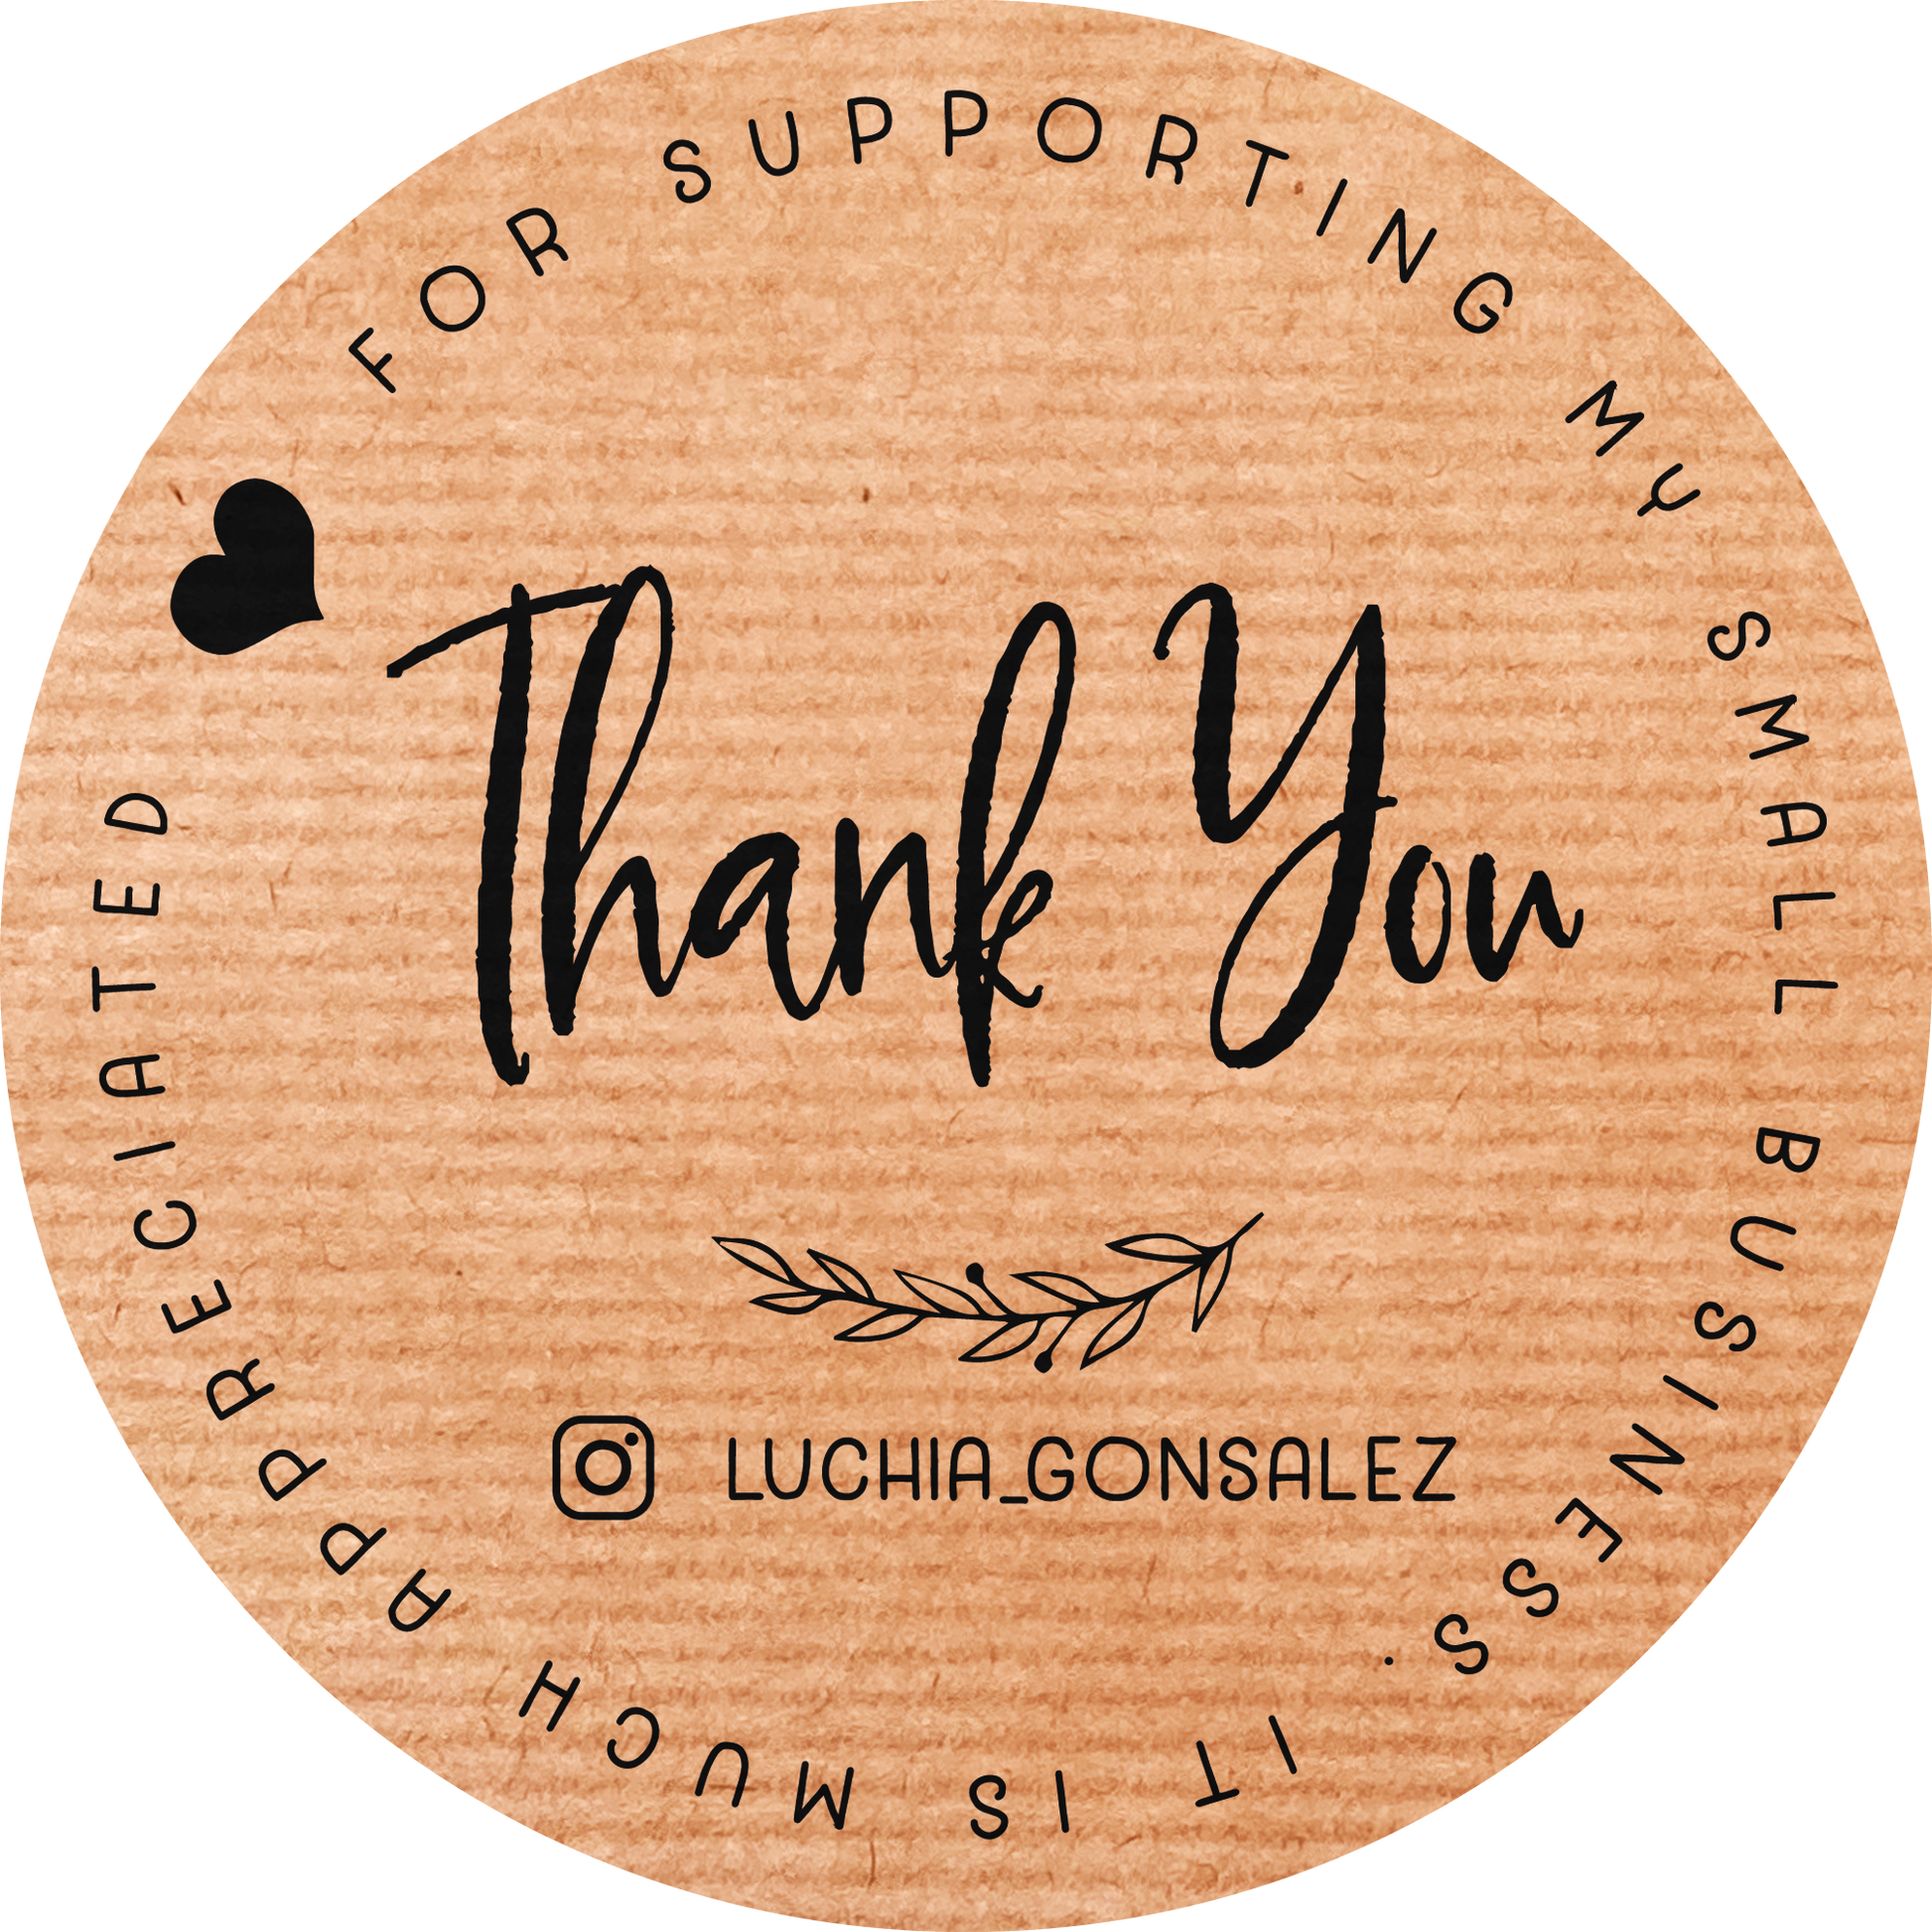 Thank you for supporting my small business stickers- XOXOKristen